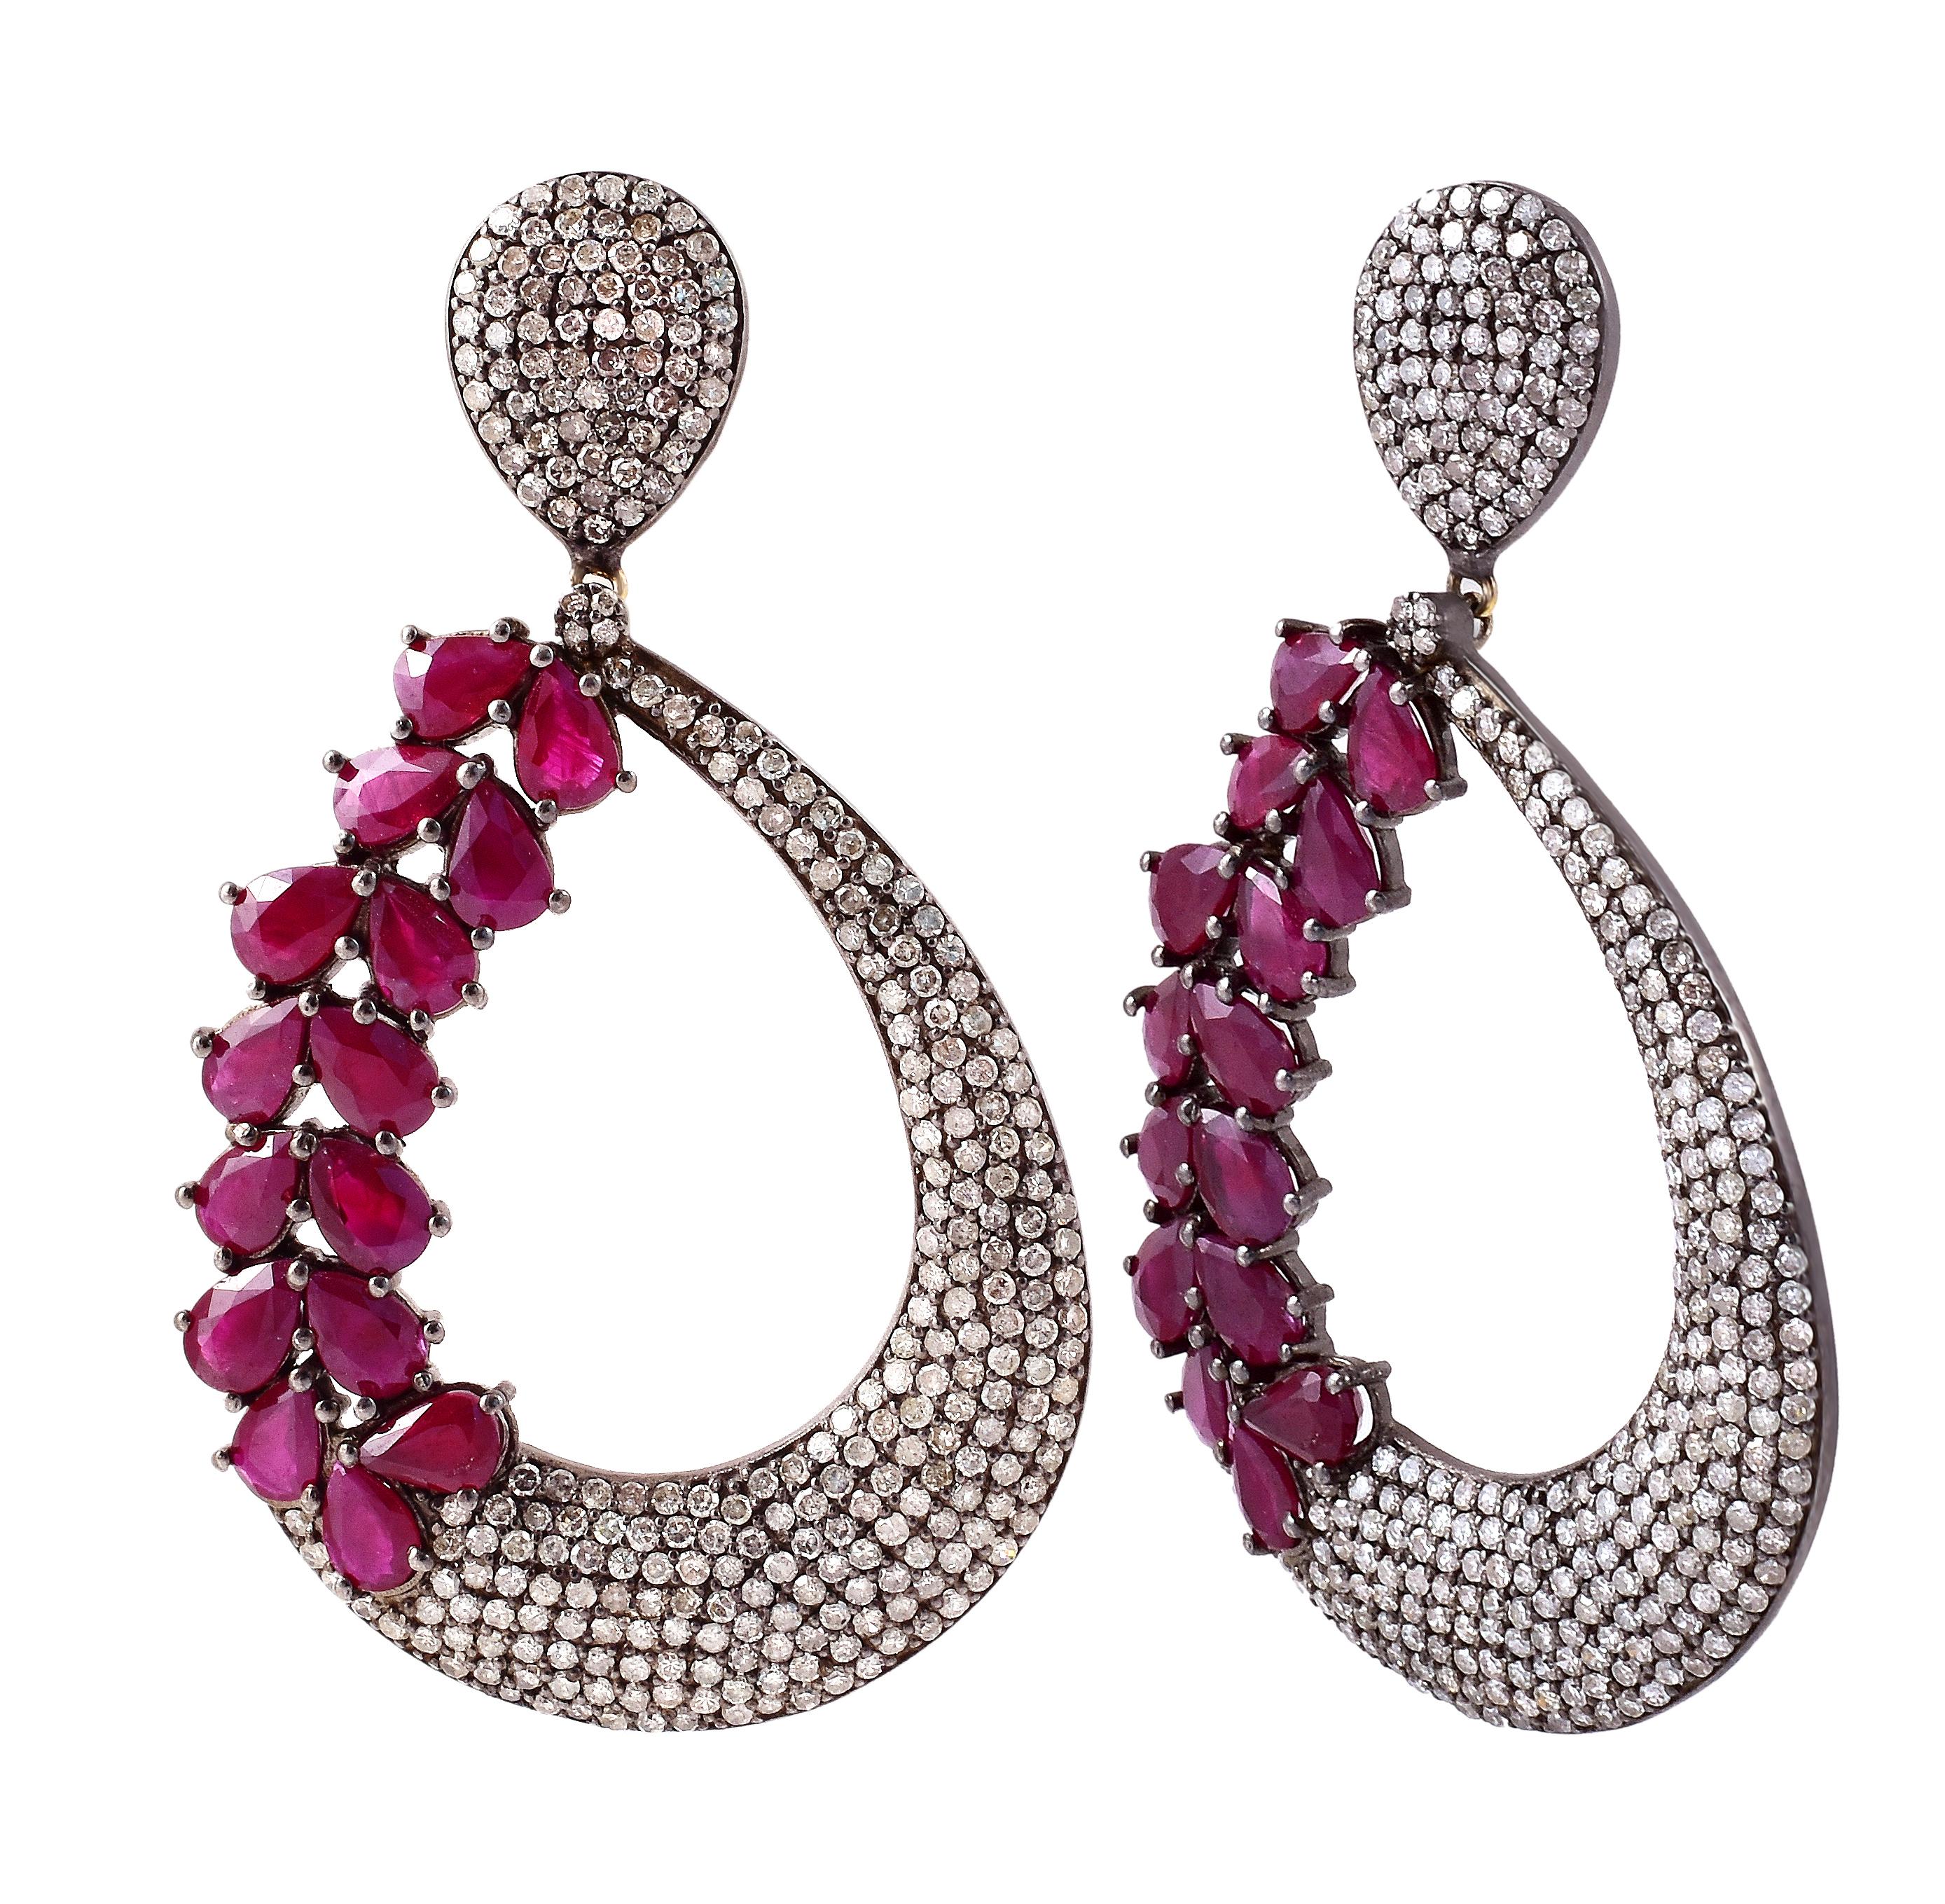 17.91 Carat Ruby and Diamond Dangle Cocktail Earrings in Victorian Style

This Victorian-style majestic crimson red ruby and diamond earring is exquisite. The open broad pear-shaped long earring pair is hollow in the center. It starts with several